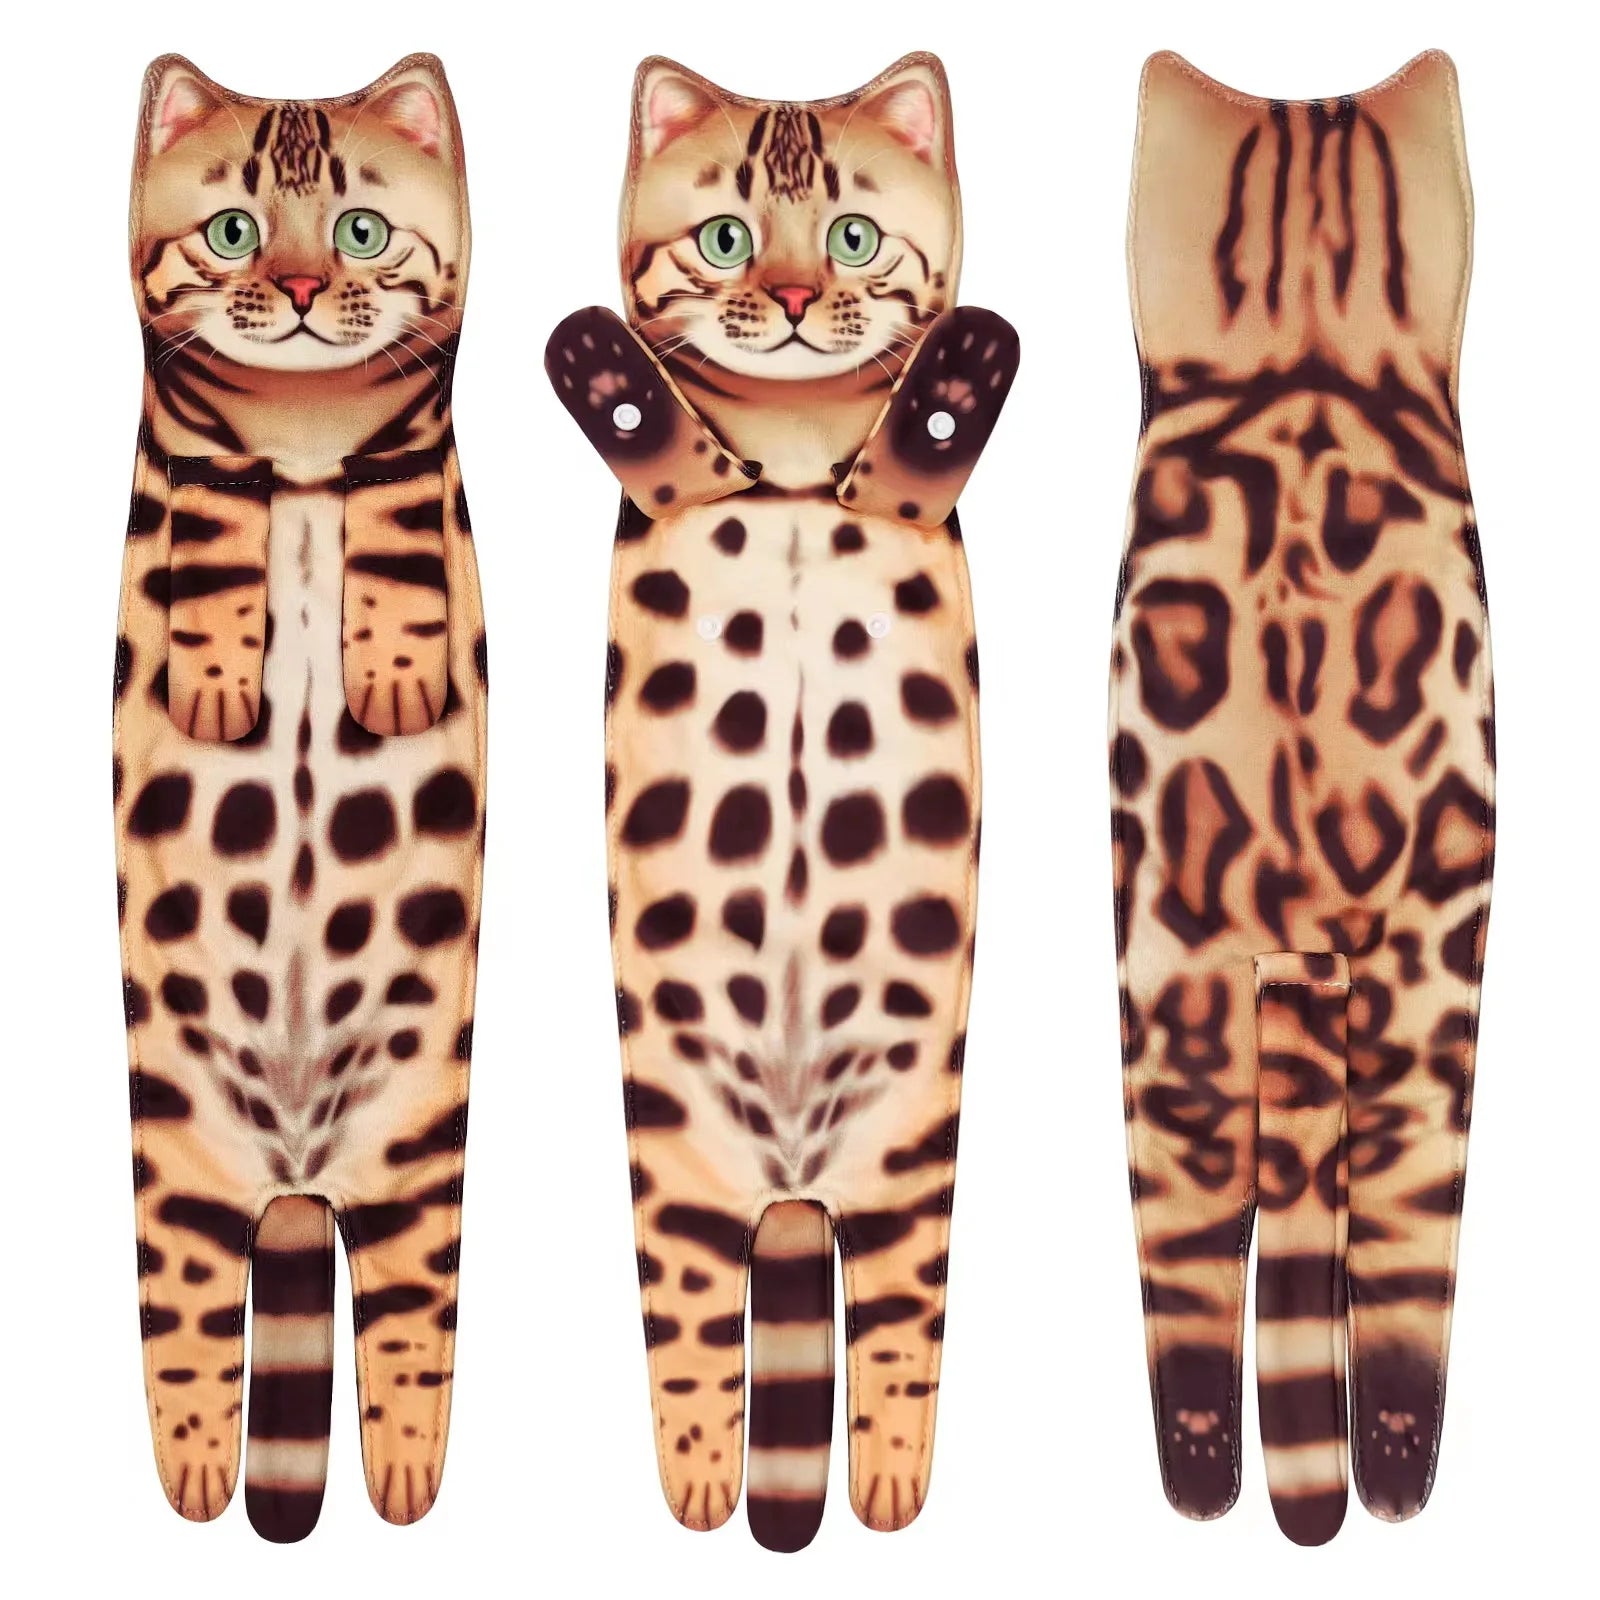 Creative and Humorous Cat-Themed Hand Towels: Soft, Absorbent, and Perfect for Your Kitchen or Bathroom - Nekoby Creative and Humorous Cat-Themed Hand Towels: Soft, Absorbent, and Perfect for Your Kitchen or Bathroom ocelot||14 / CHINA||200007763